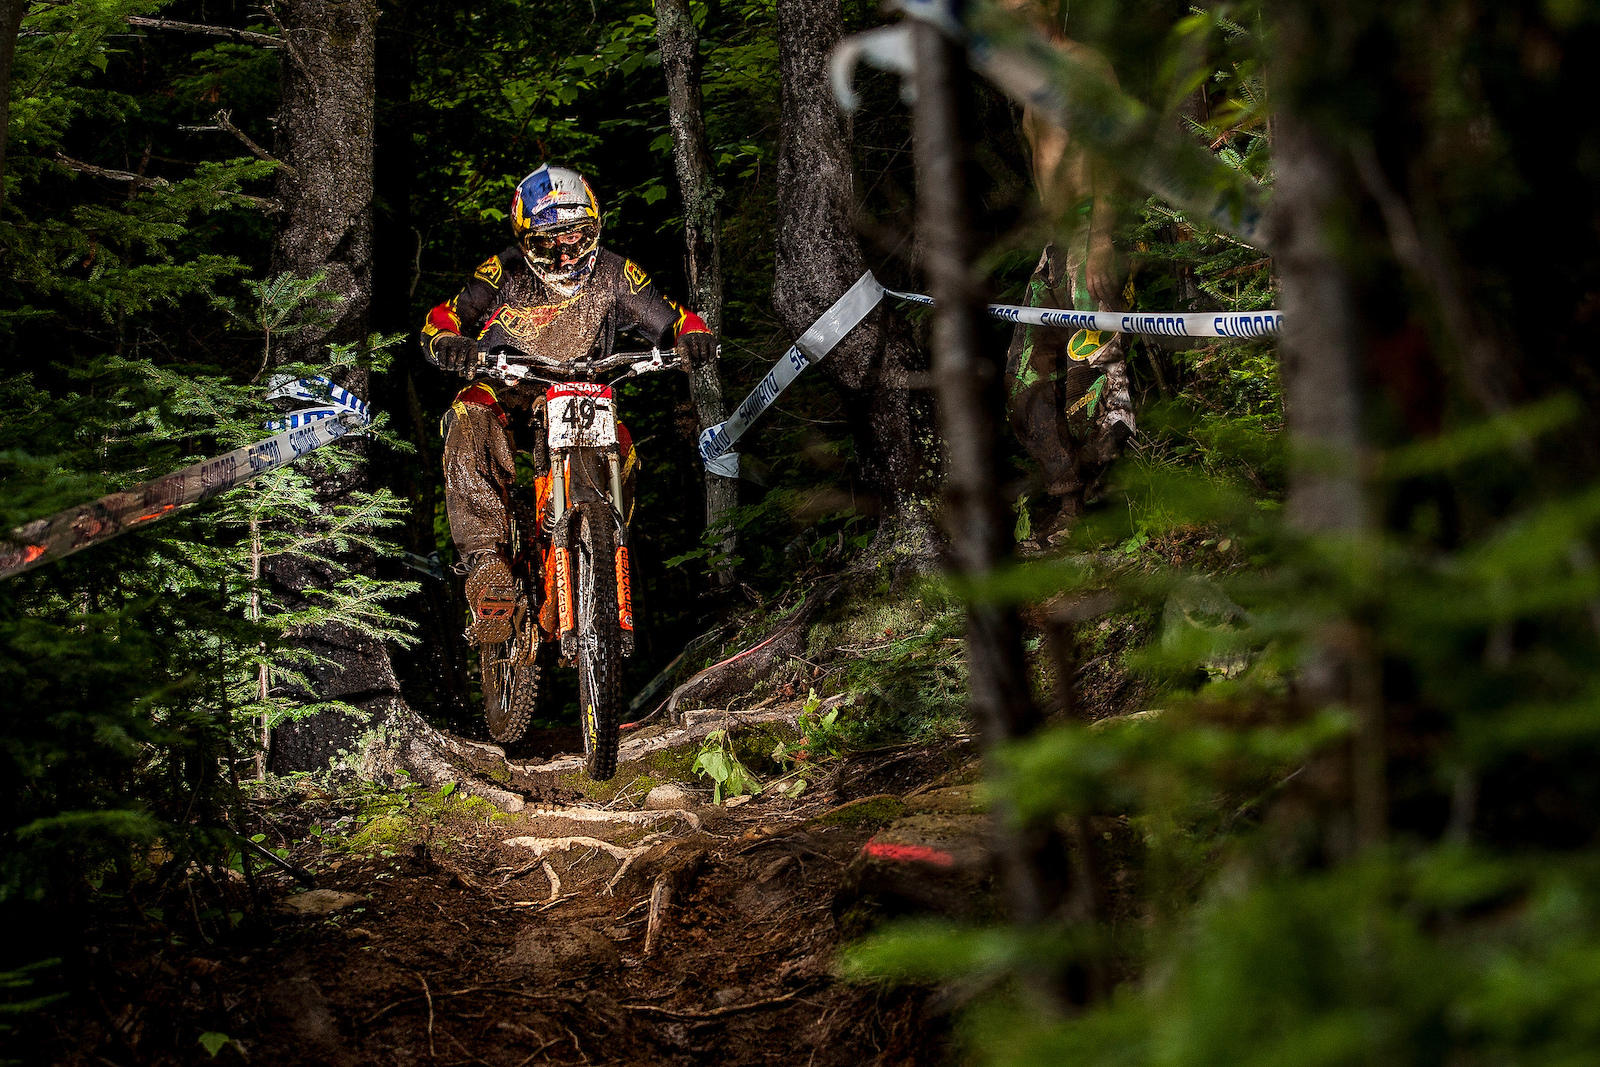  during the World Cup at Mont Saint Anne Quebec Canada. Photo Sven Martin